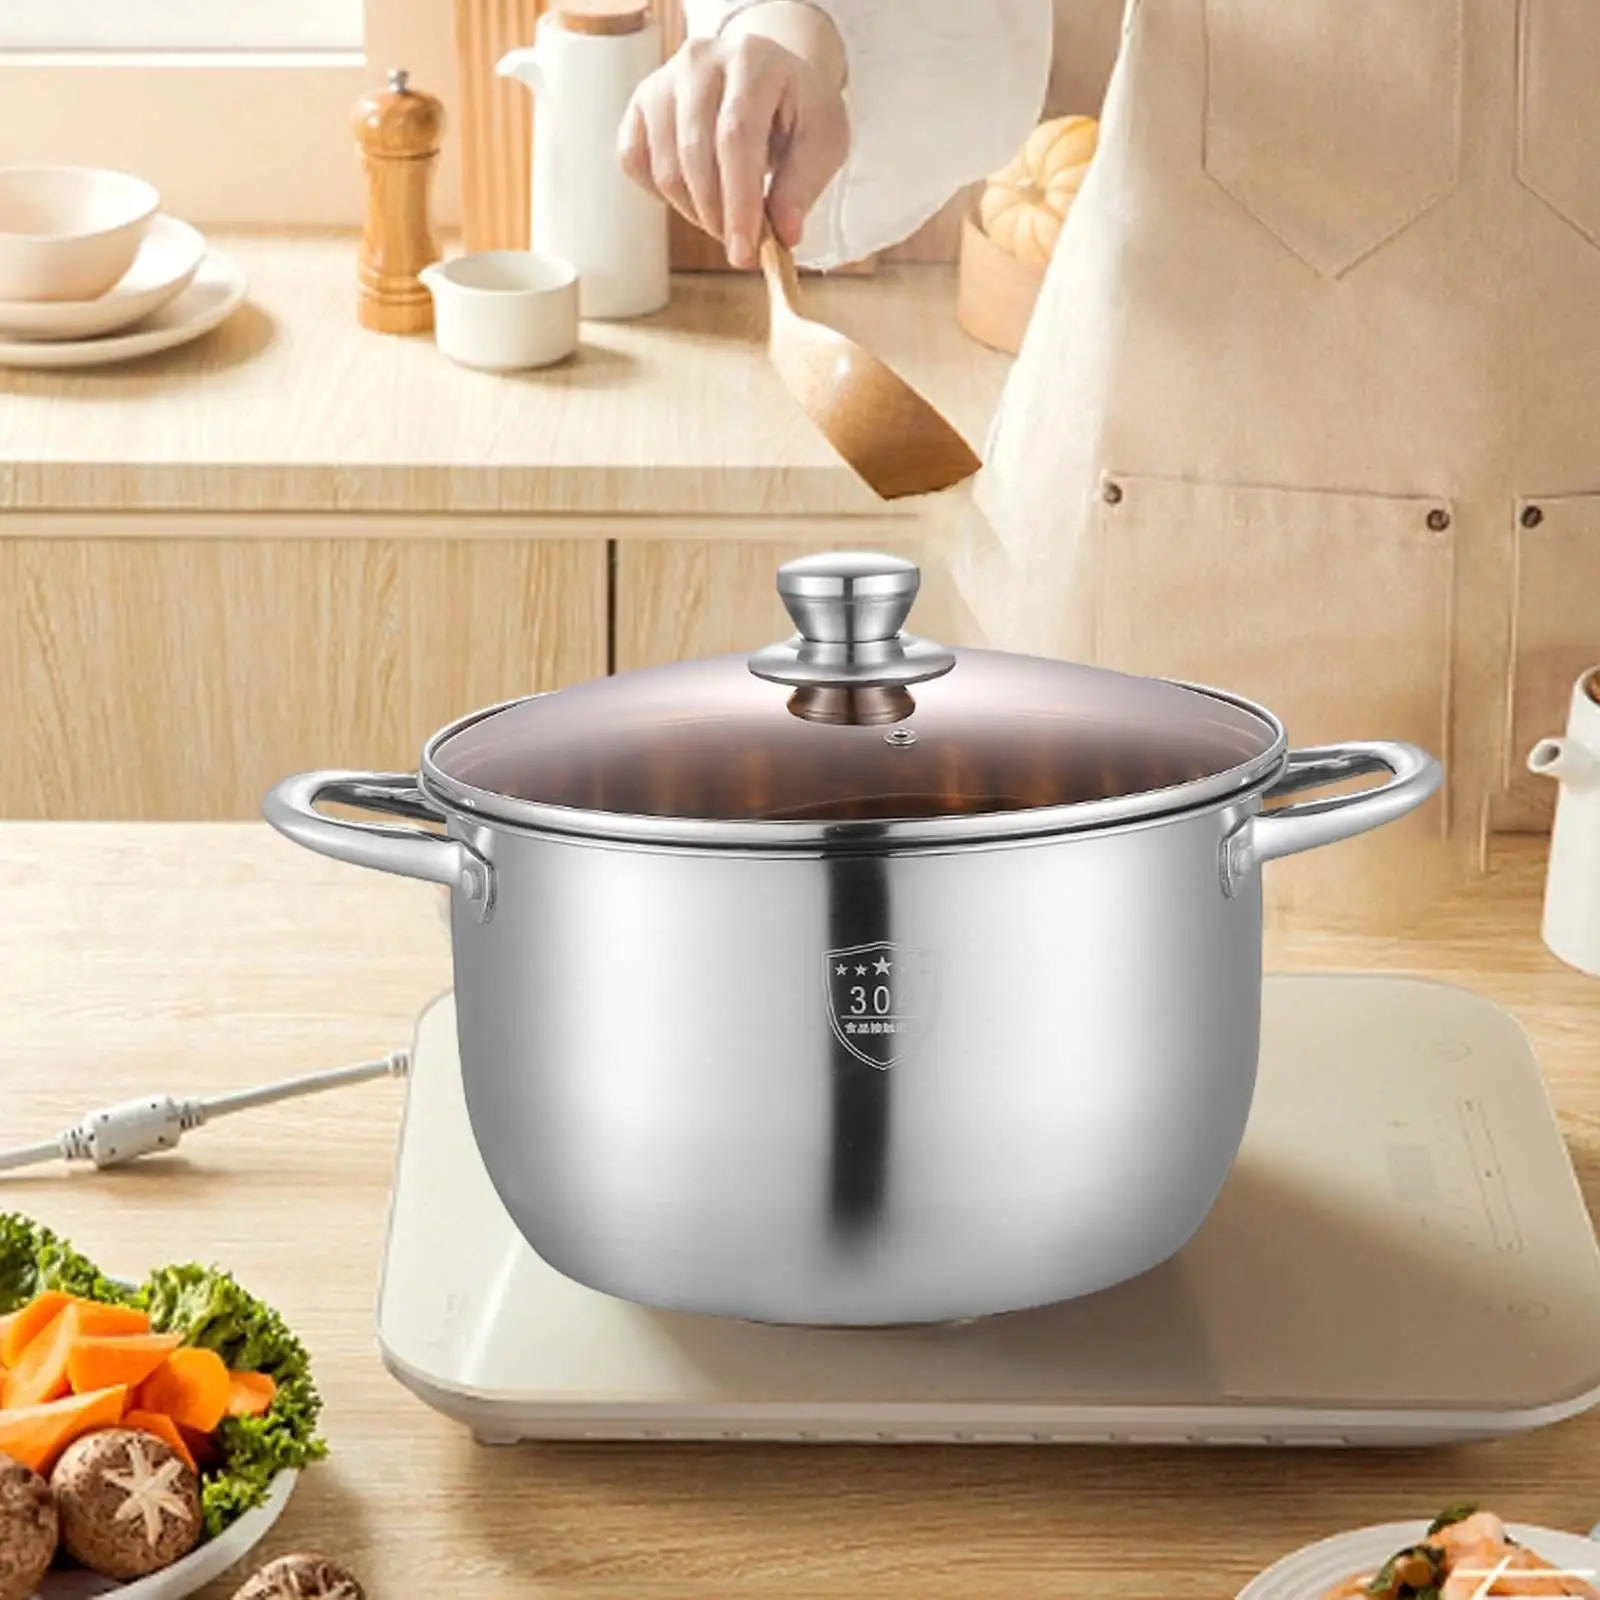 Stainless Steel Stockpot with Lid Dual Handle Suitable for All Stoves Small Saucepan for Sauce Vegetables Warming Milk Soup Meat